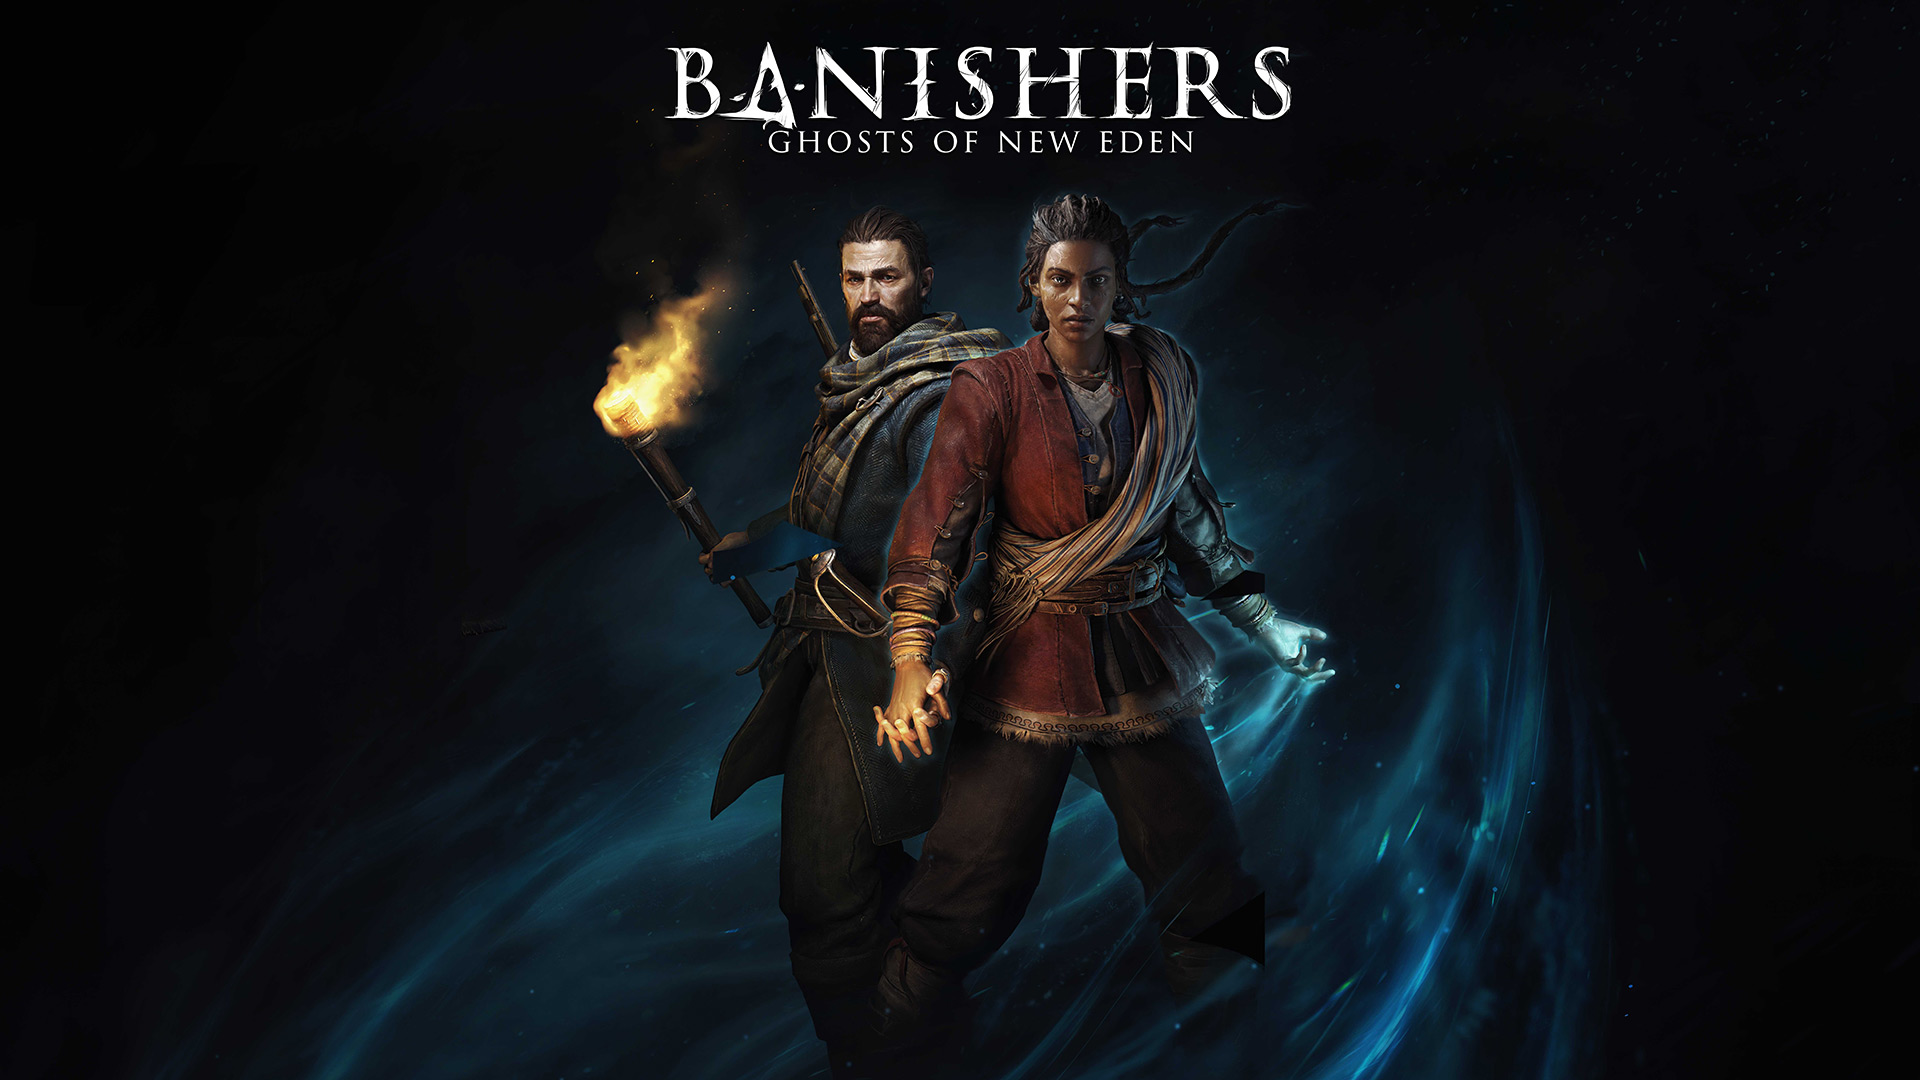 Banishers: Ghosts of New Eden launches November 7 on PlayStation 5, Xbox Series X|S, and PC